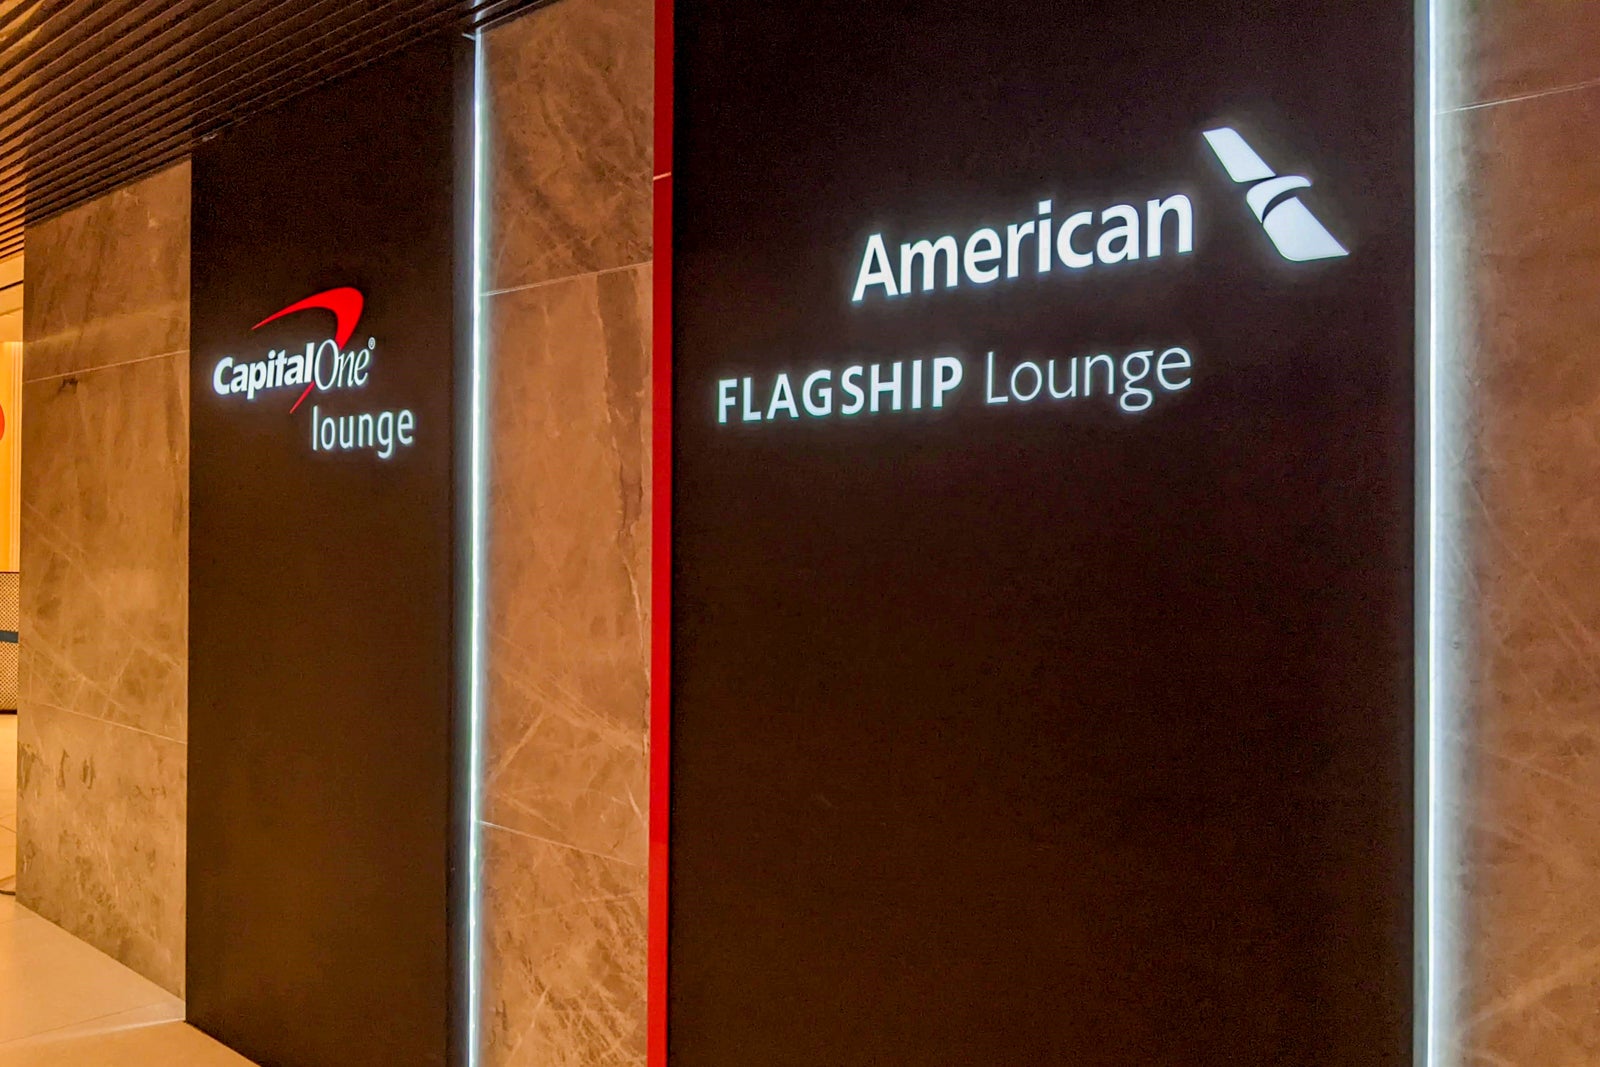 DFW American Airlines Flagship Lounge